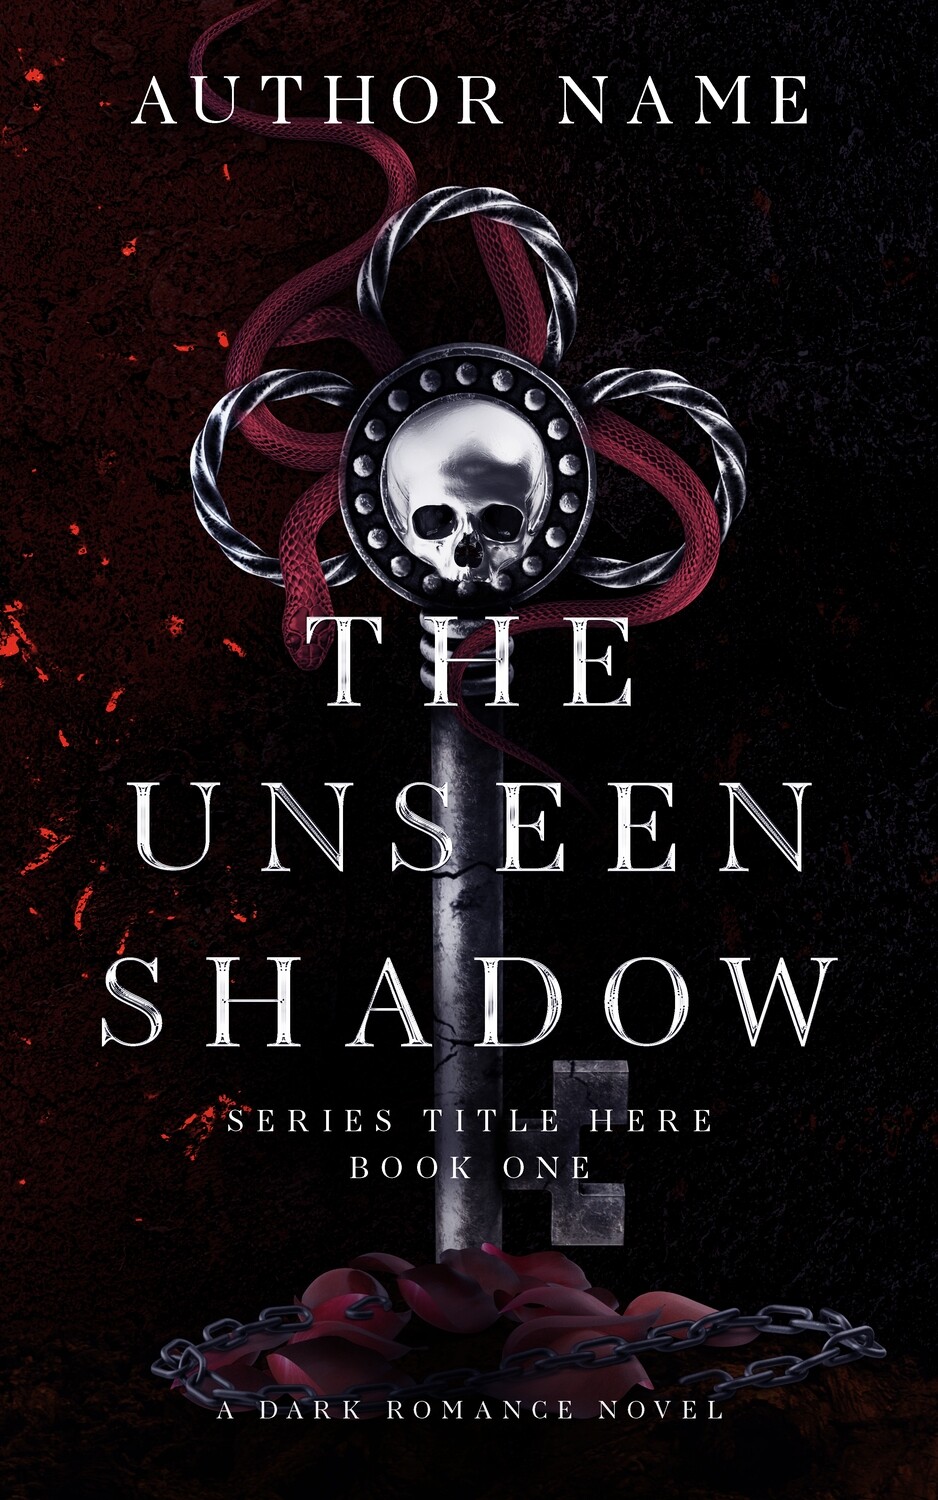 THE UNSEEN SHADOW